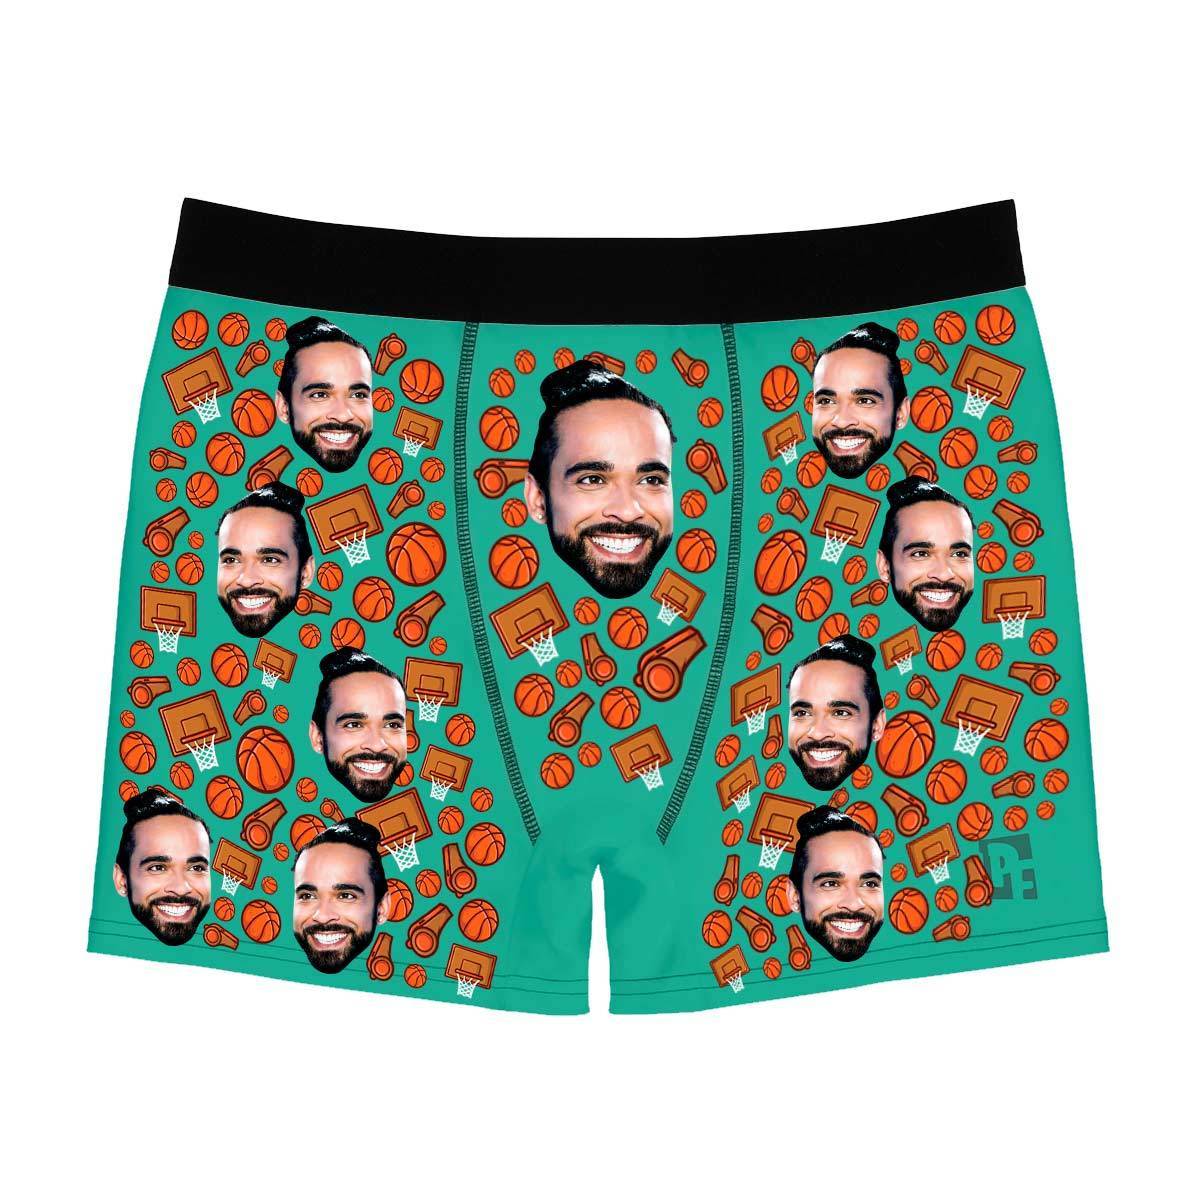 Mint Basketball men's boxer briefs personalized with photo printed on them